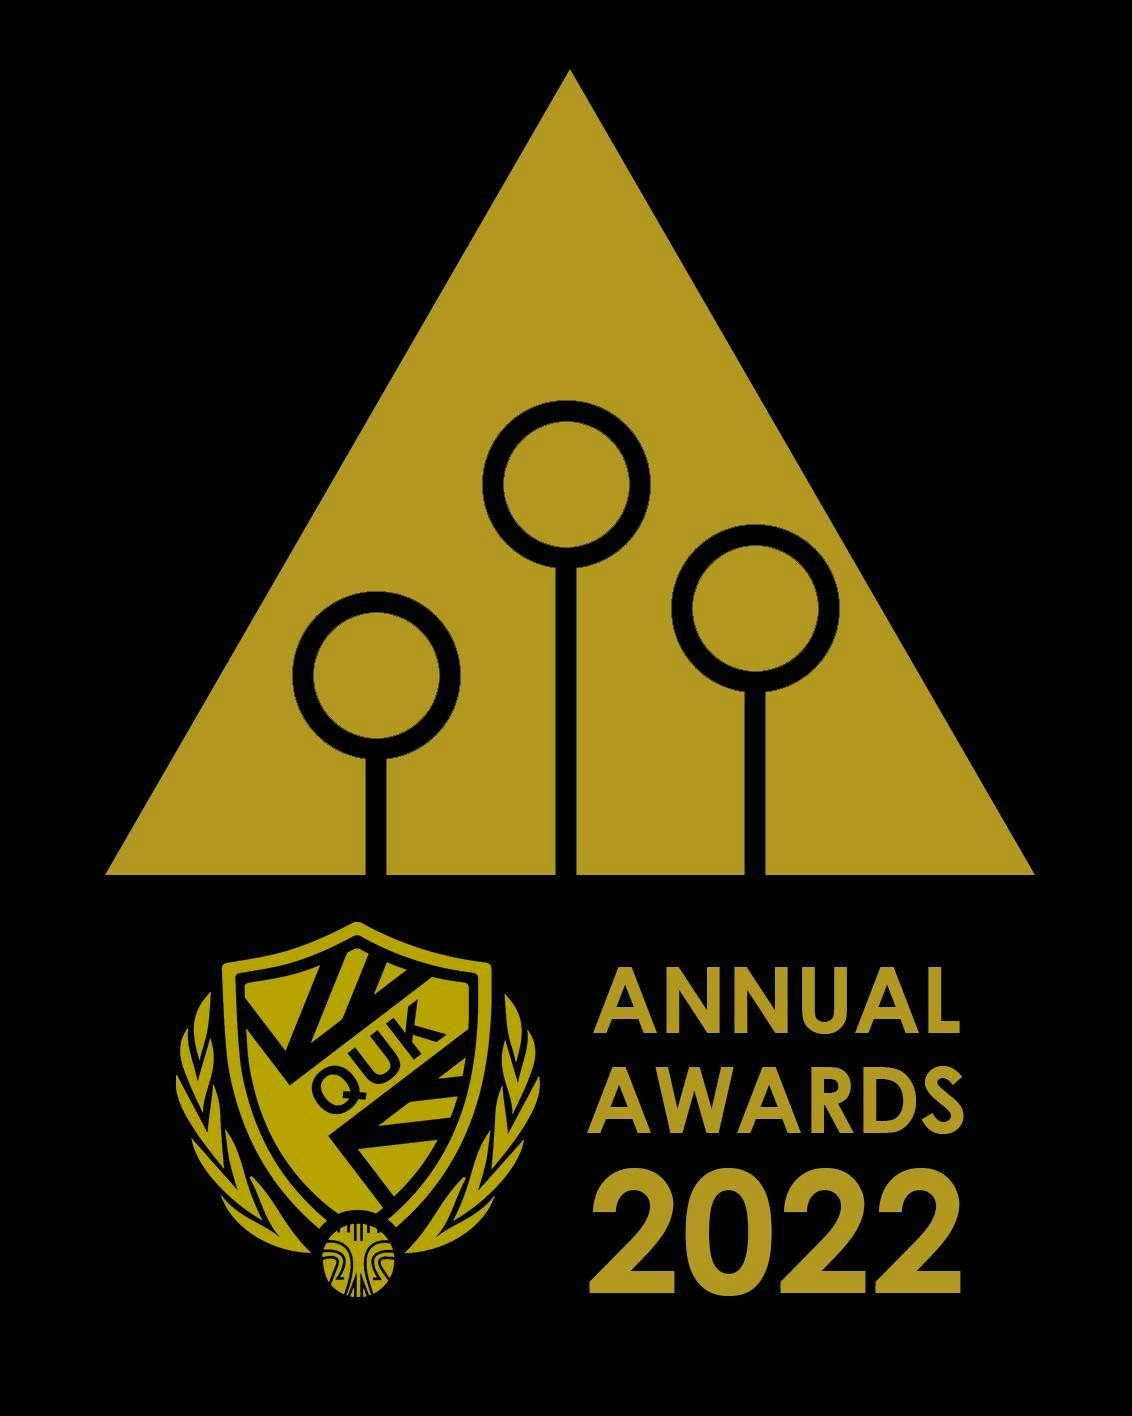 QuidditchUK 'Annual Awards 2022' Poster featuring the QUK Logo.